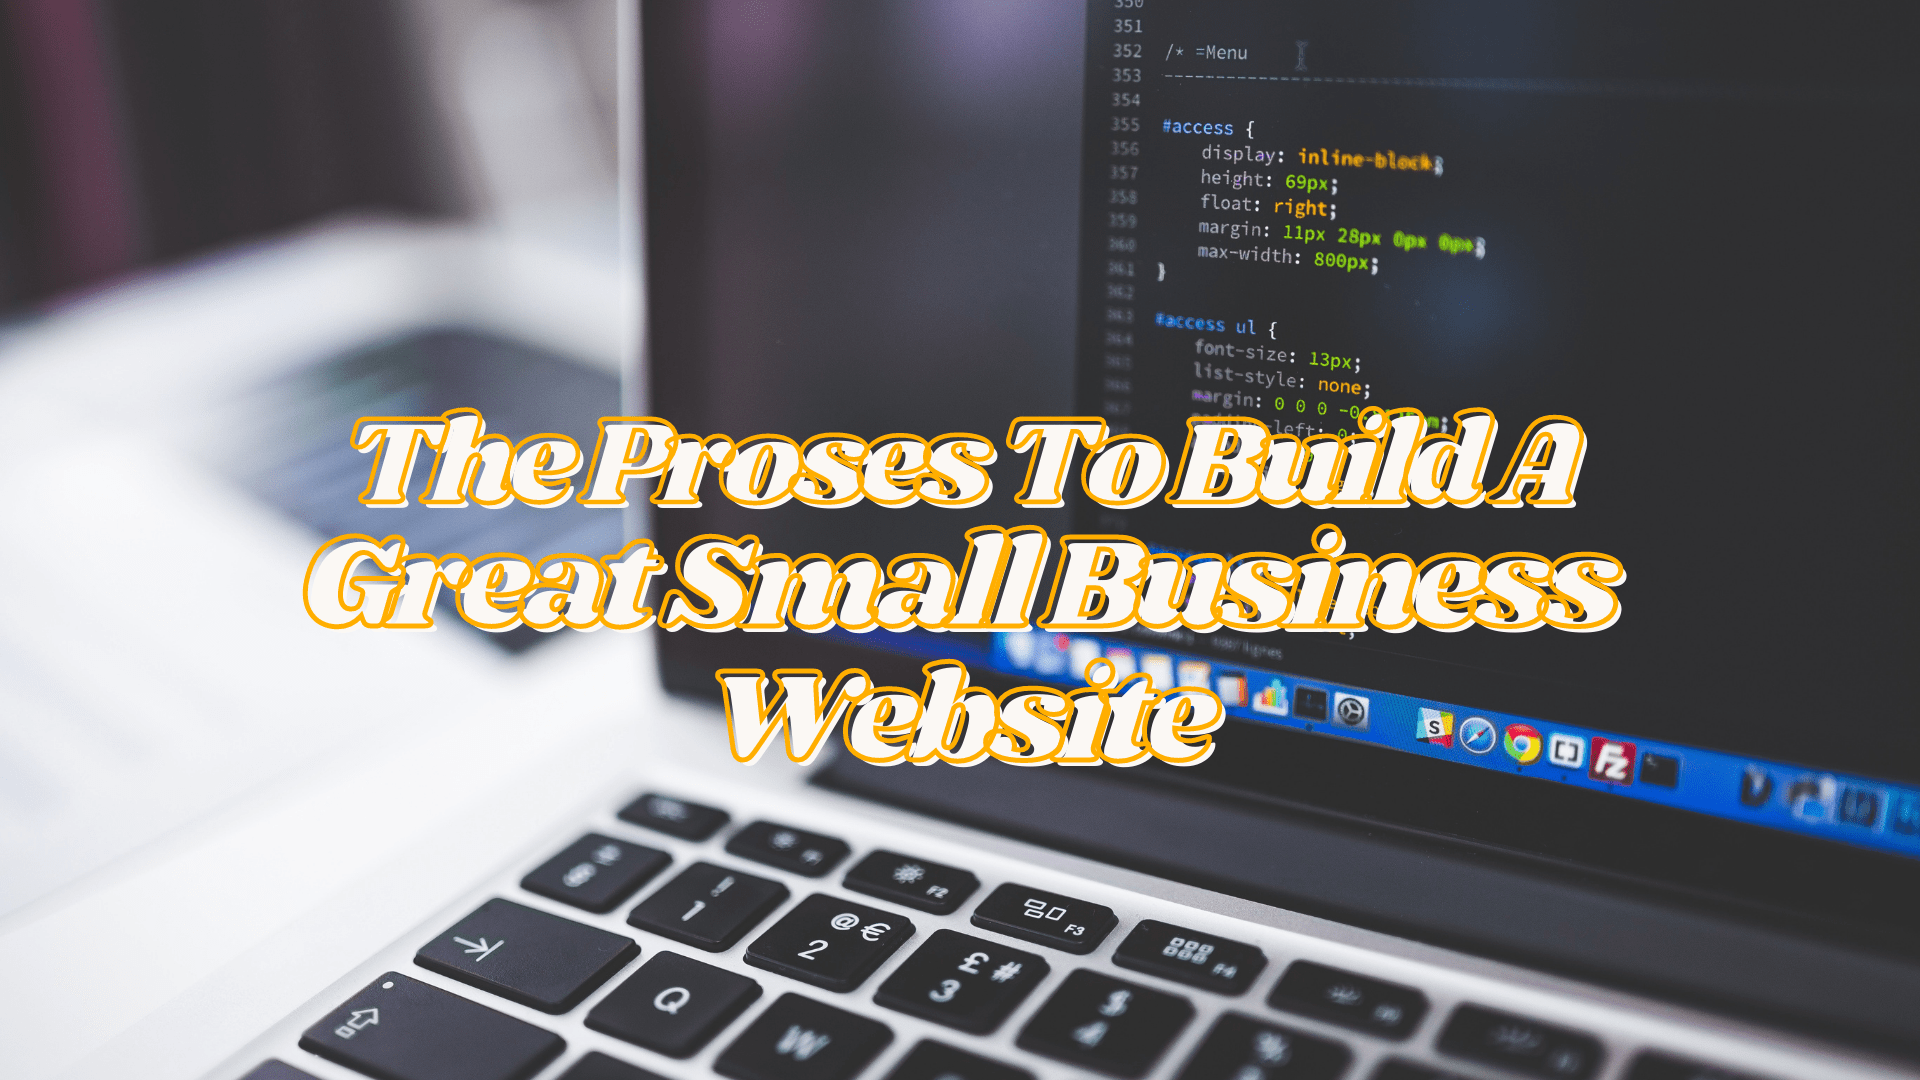 Tips For Business: The Proses To Build A Great Small Business Website